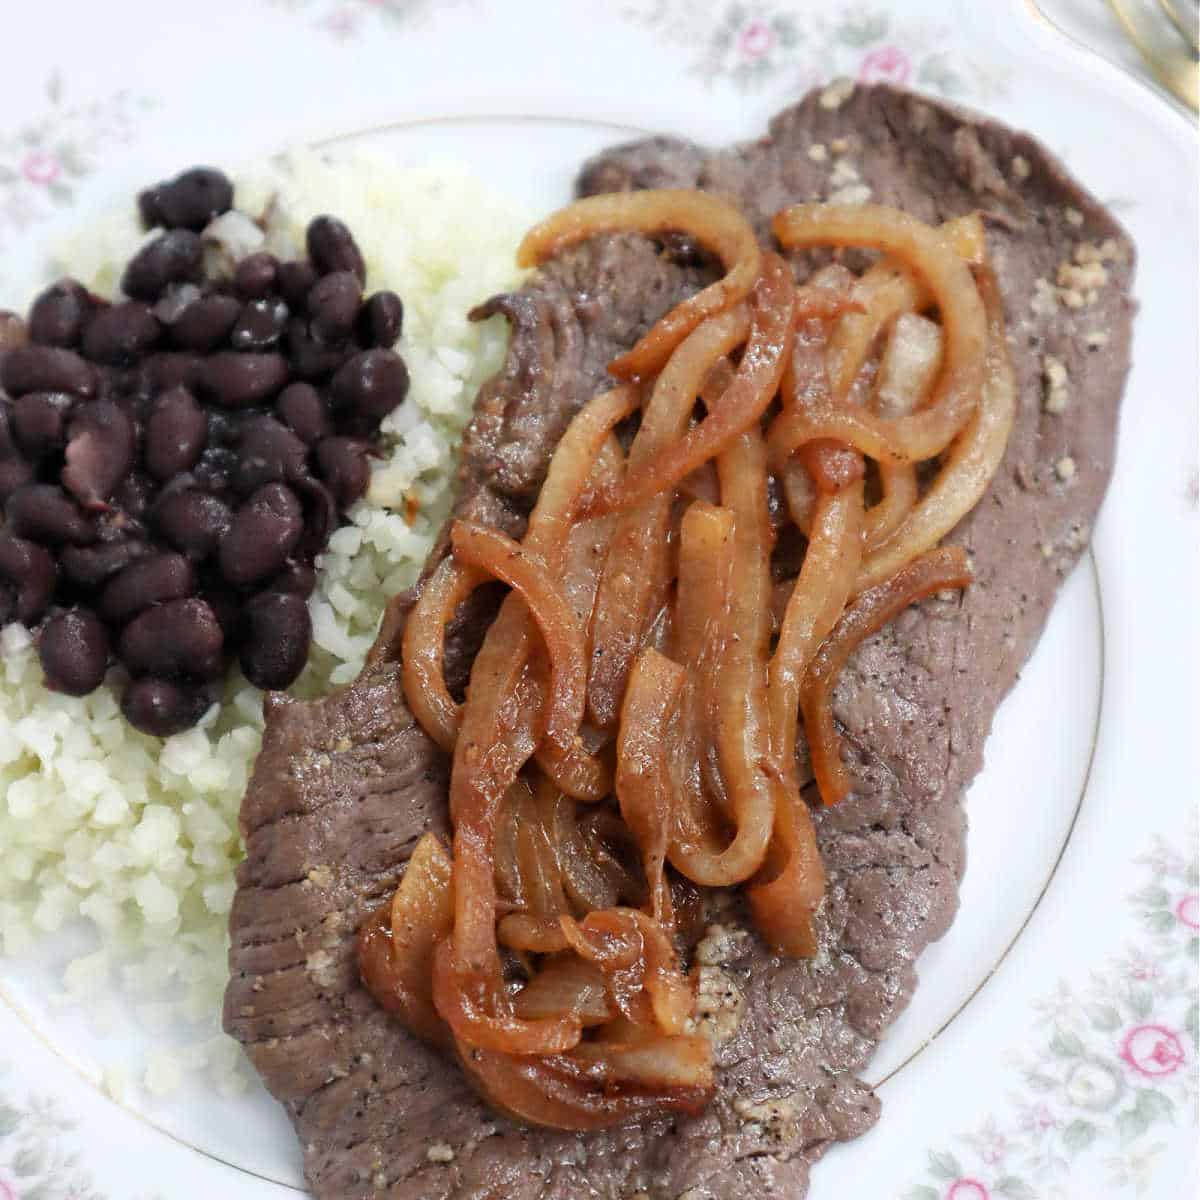 Black beans, cauliflower rice, and Cuban steak with onions on a white plate.